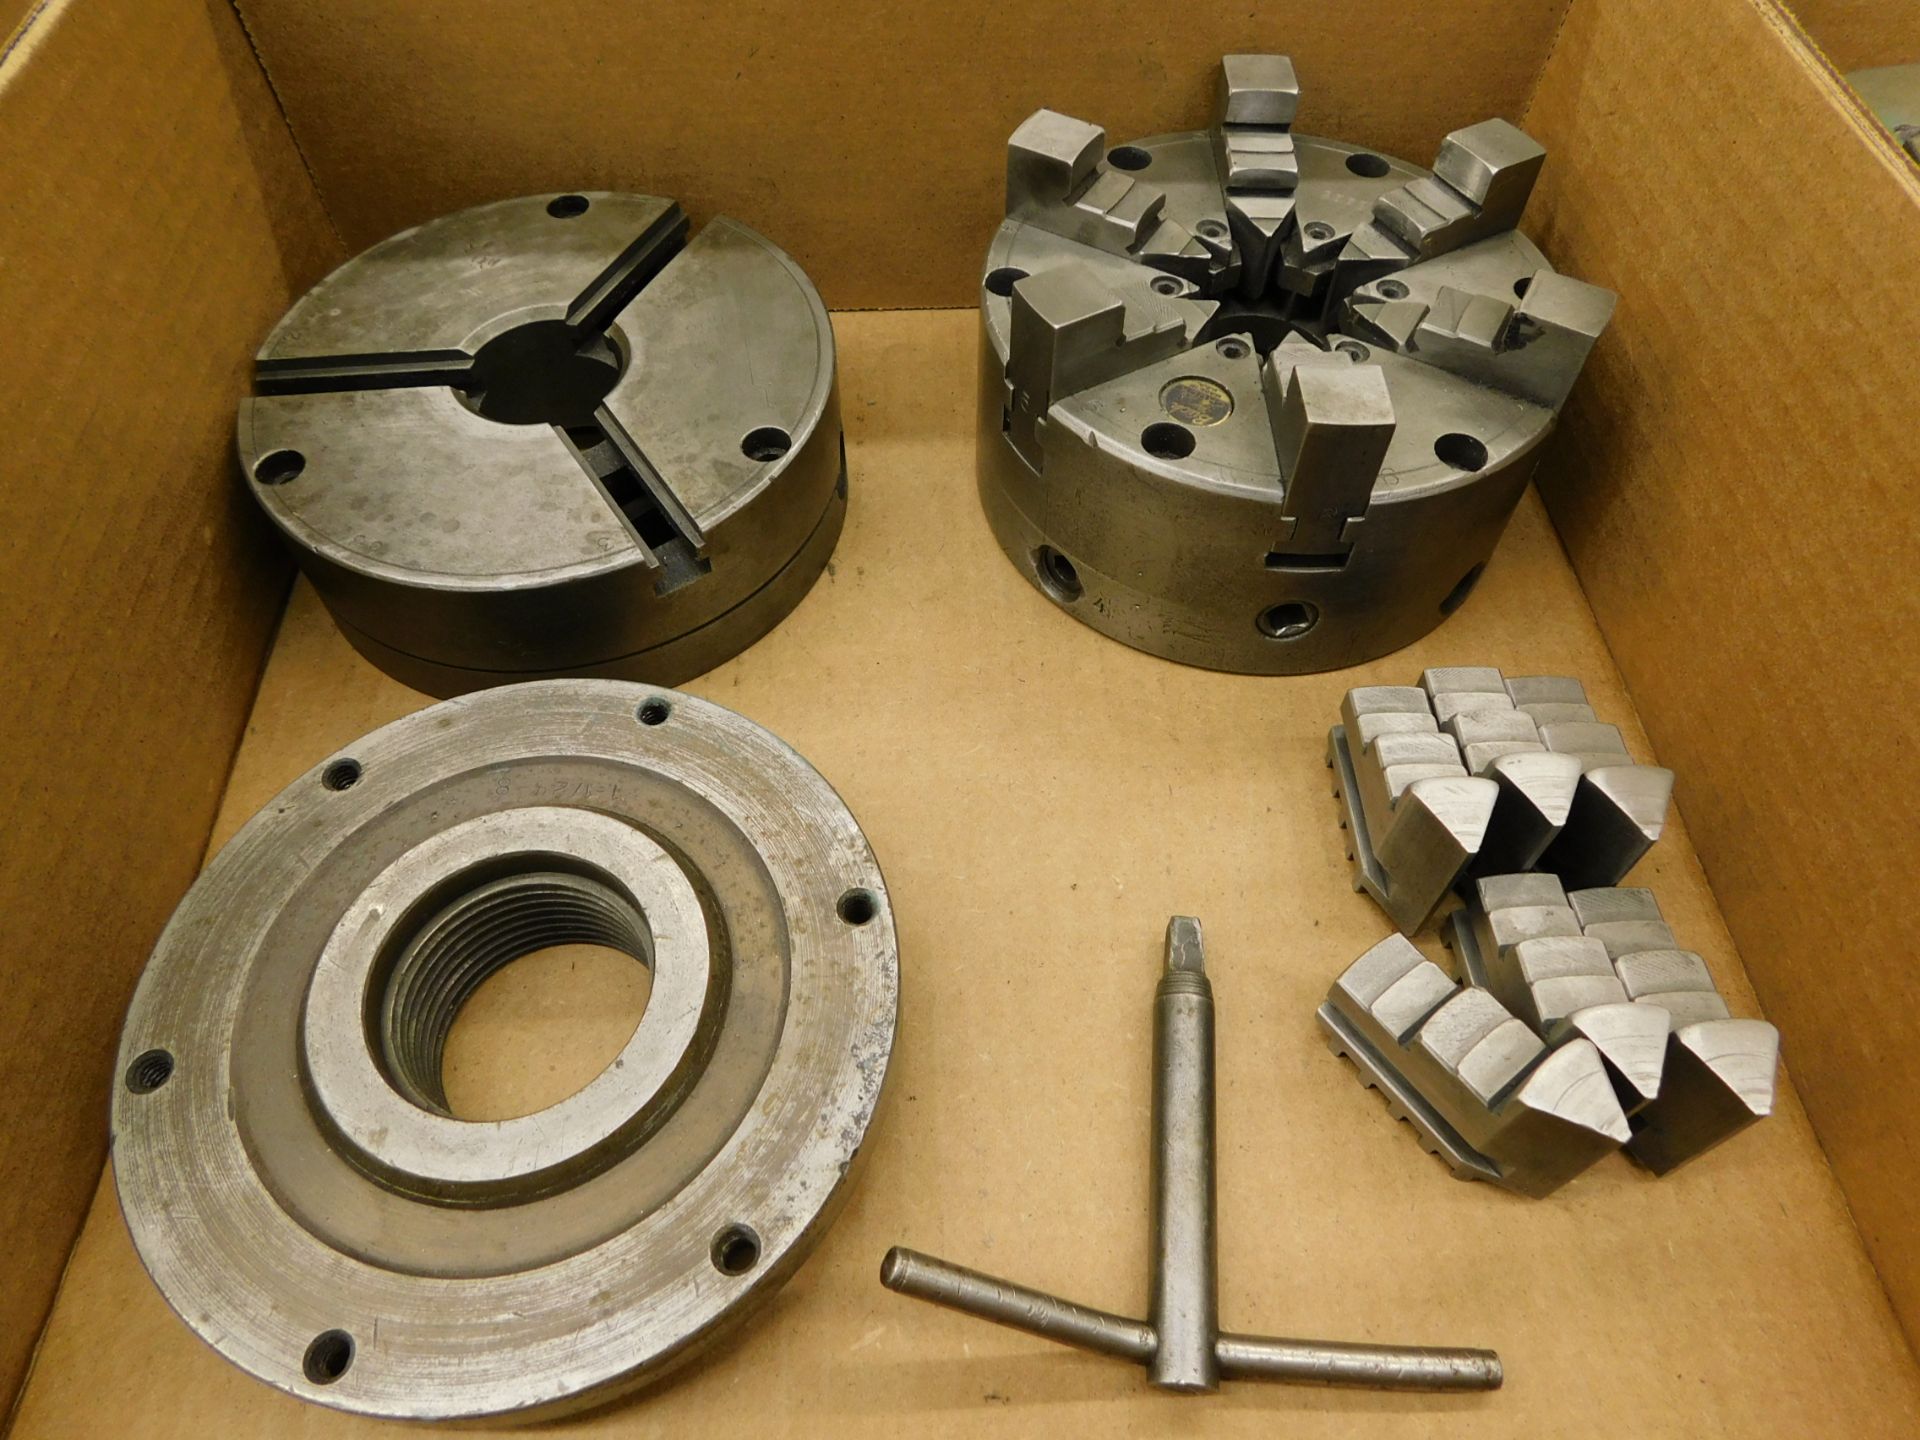 Buck 5" 6-Jaw Chuck and Miscellaneous Chuck Parts